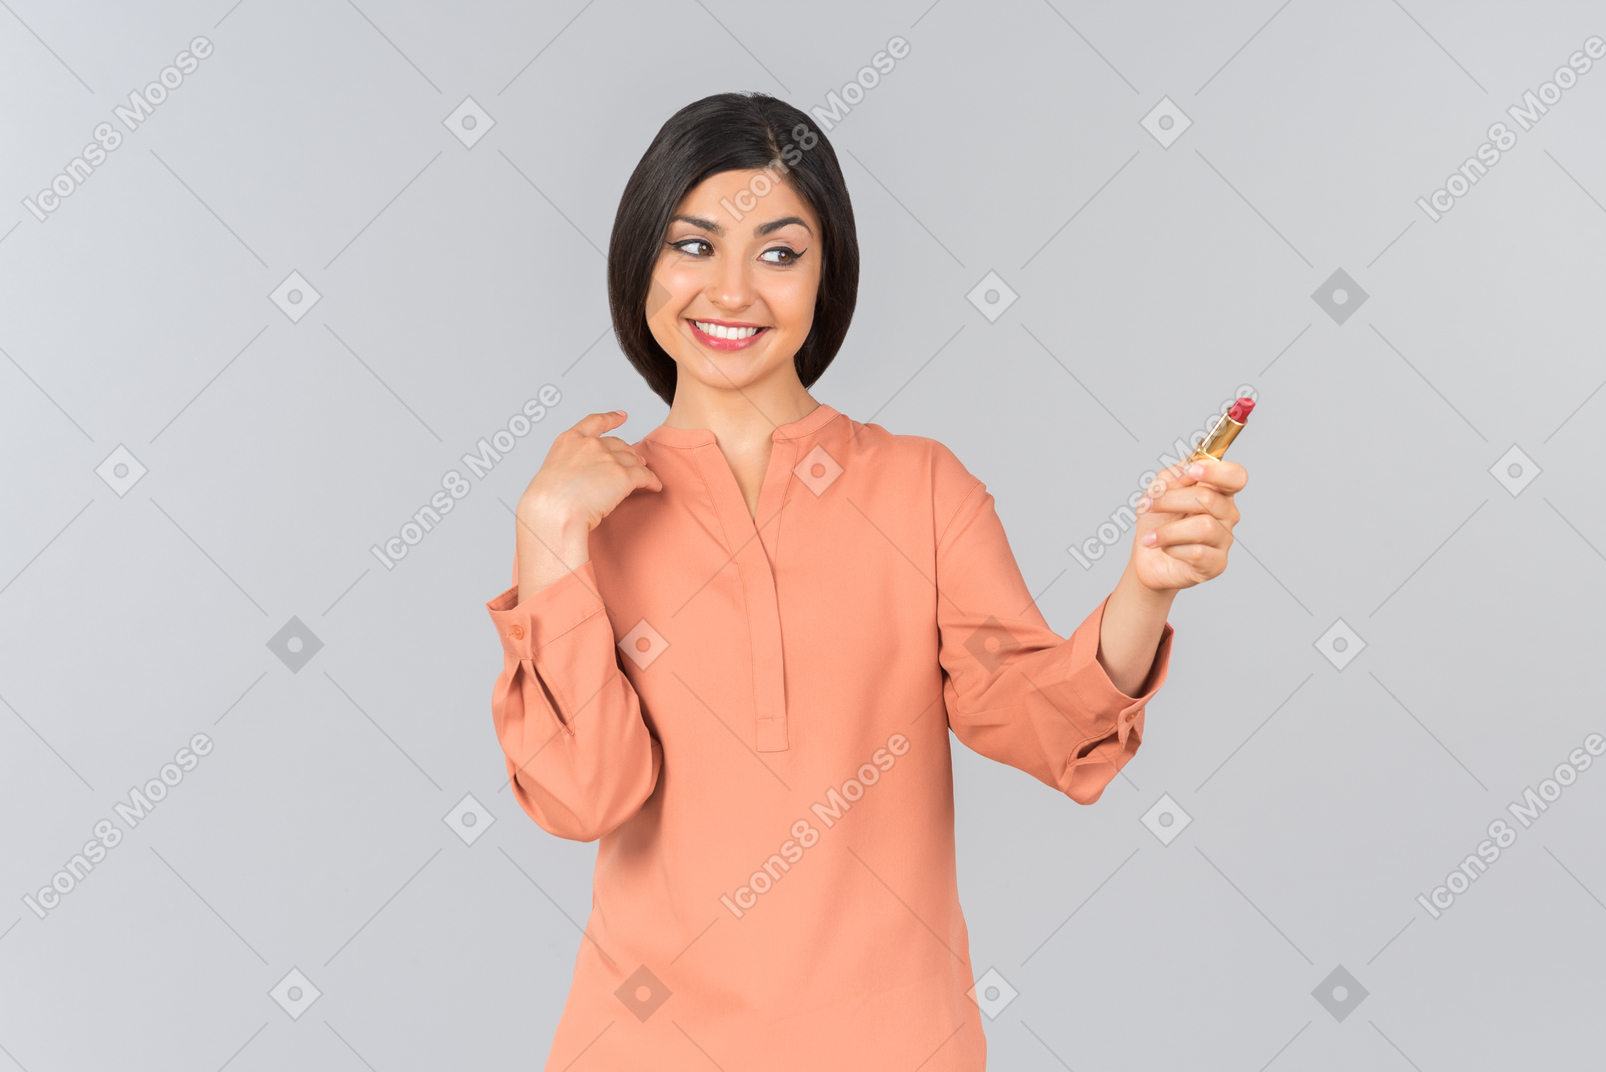 Indian woman in orange top wearing lipstick and holding one